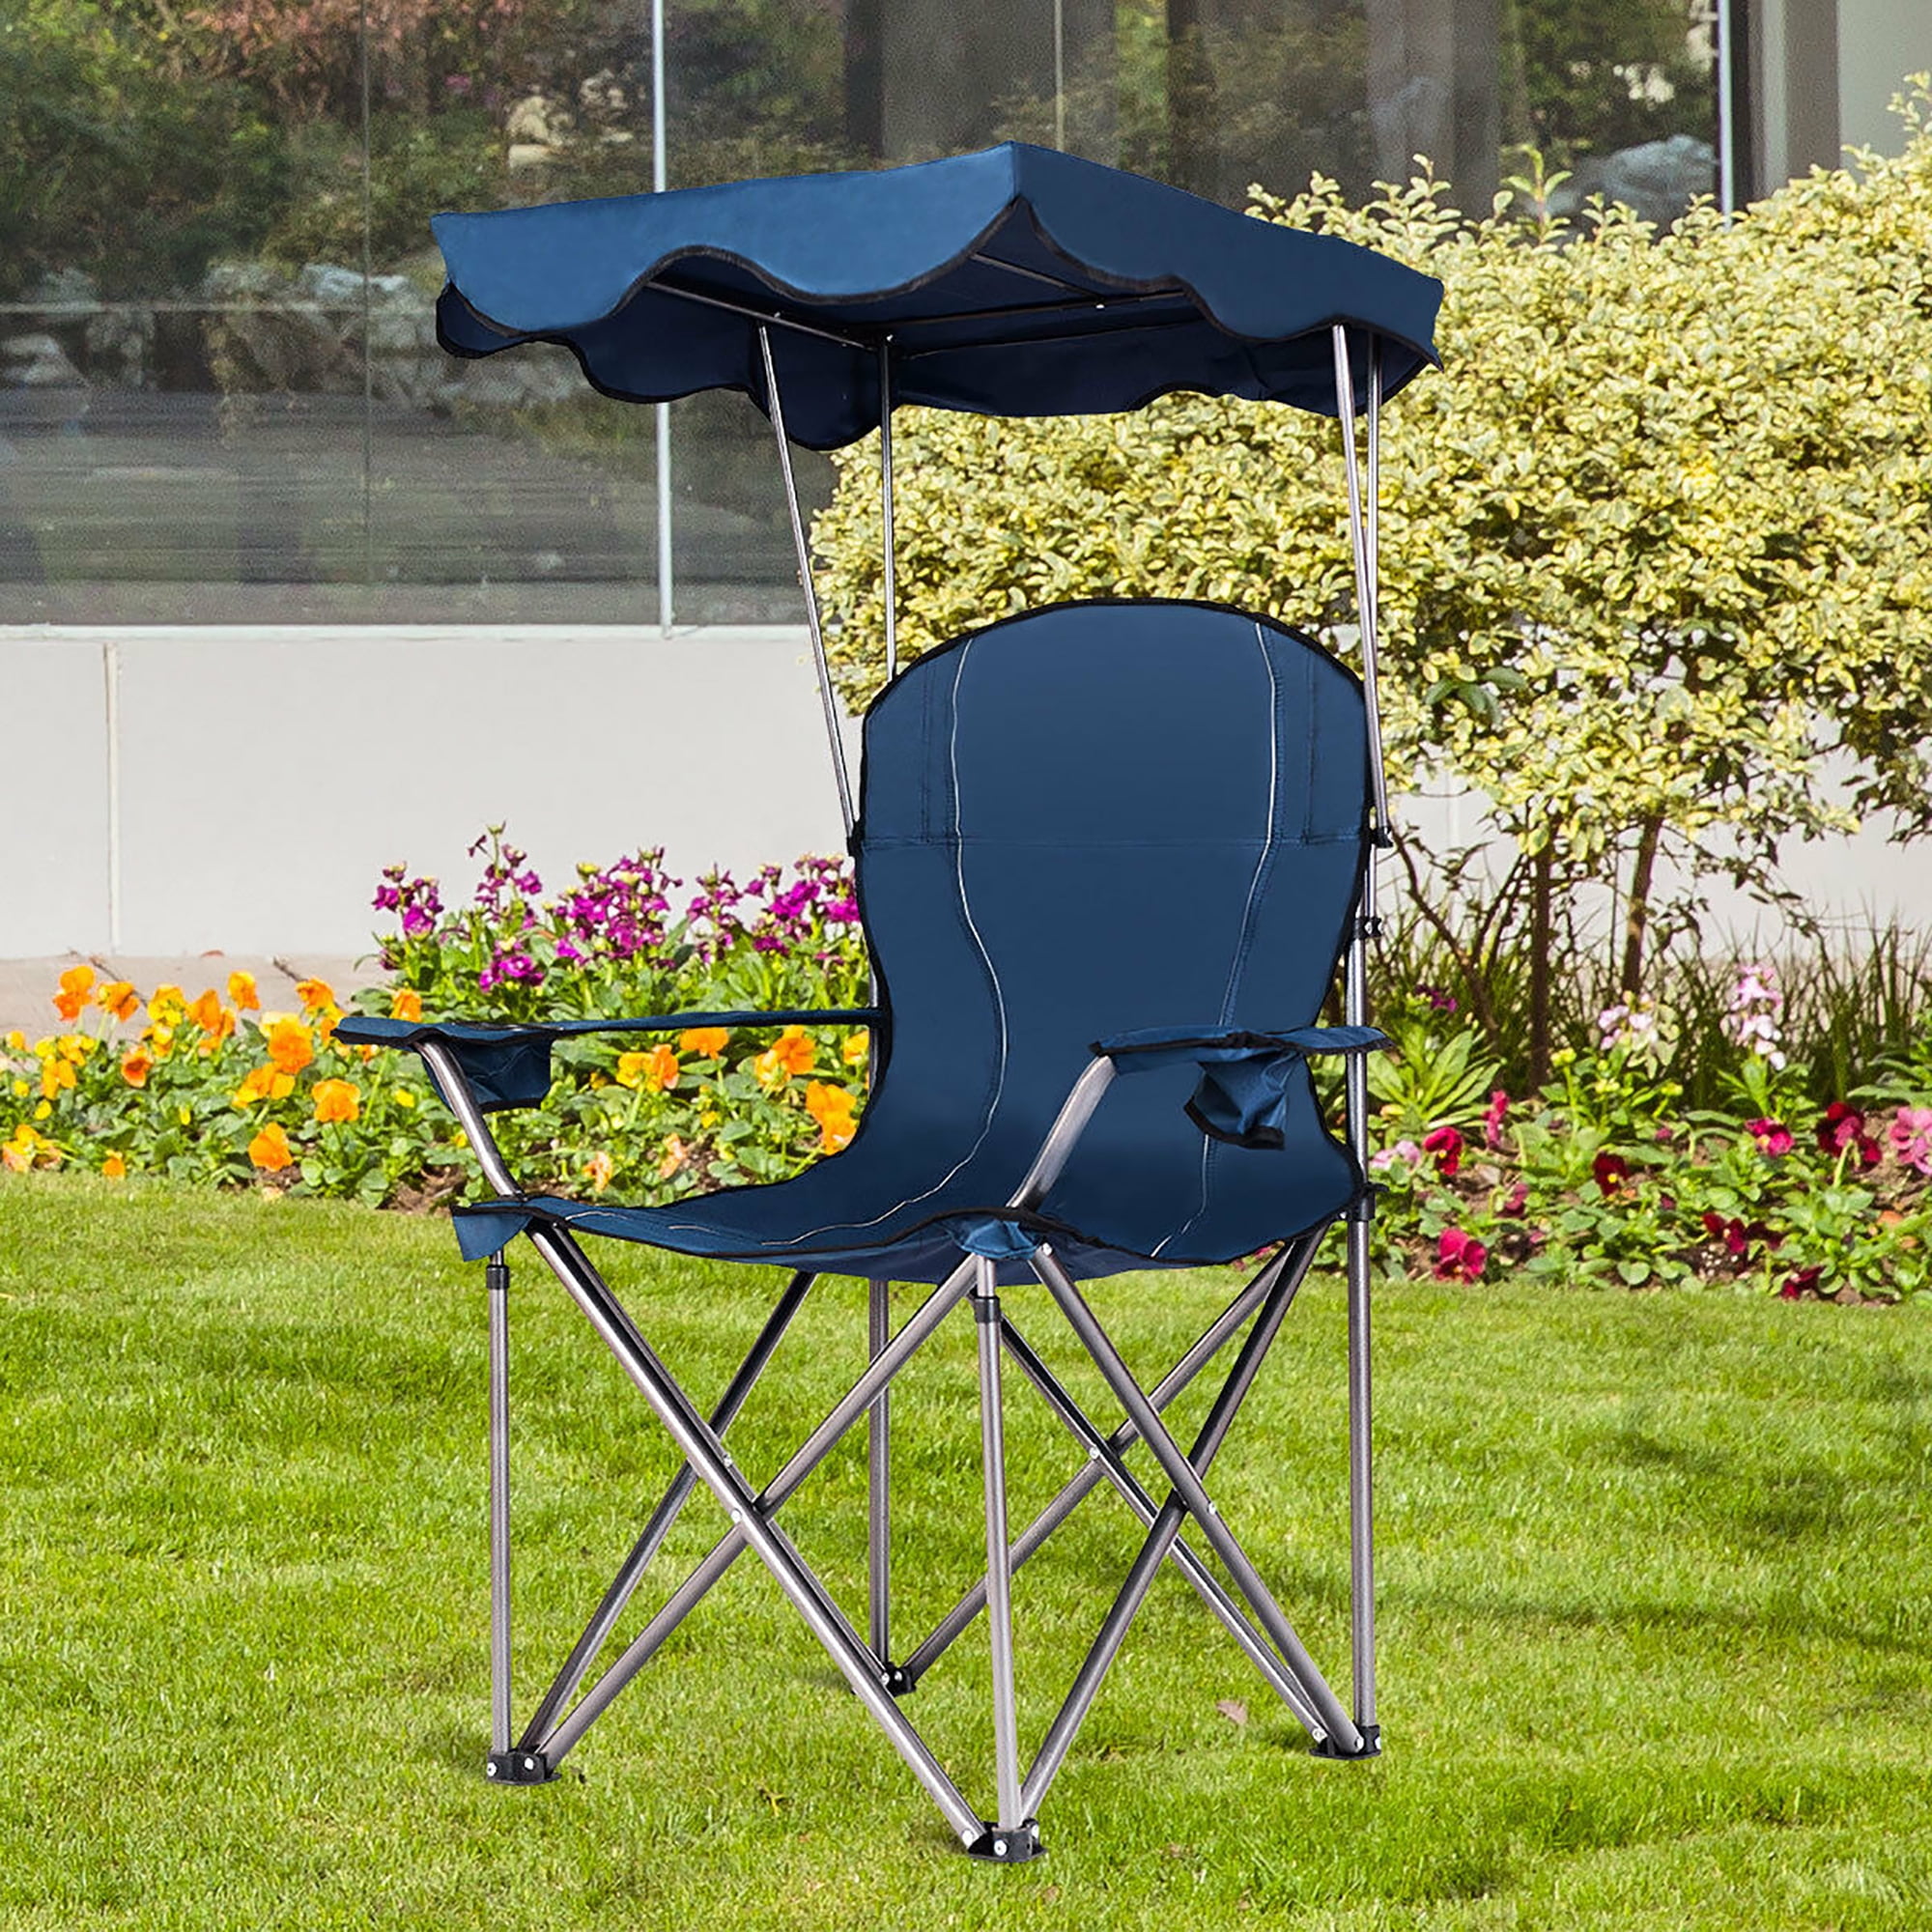 FOLDING CHAIR CAMPING BEACH OUTDOOR FISHING CANOPY CHAIRS WITH STORAGE CARRY BAG 